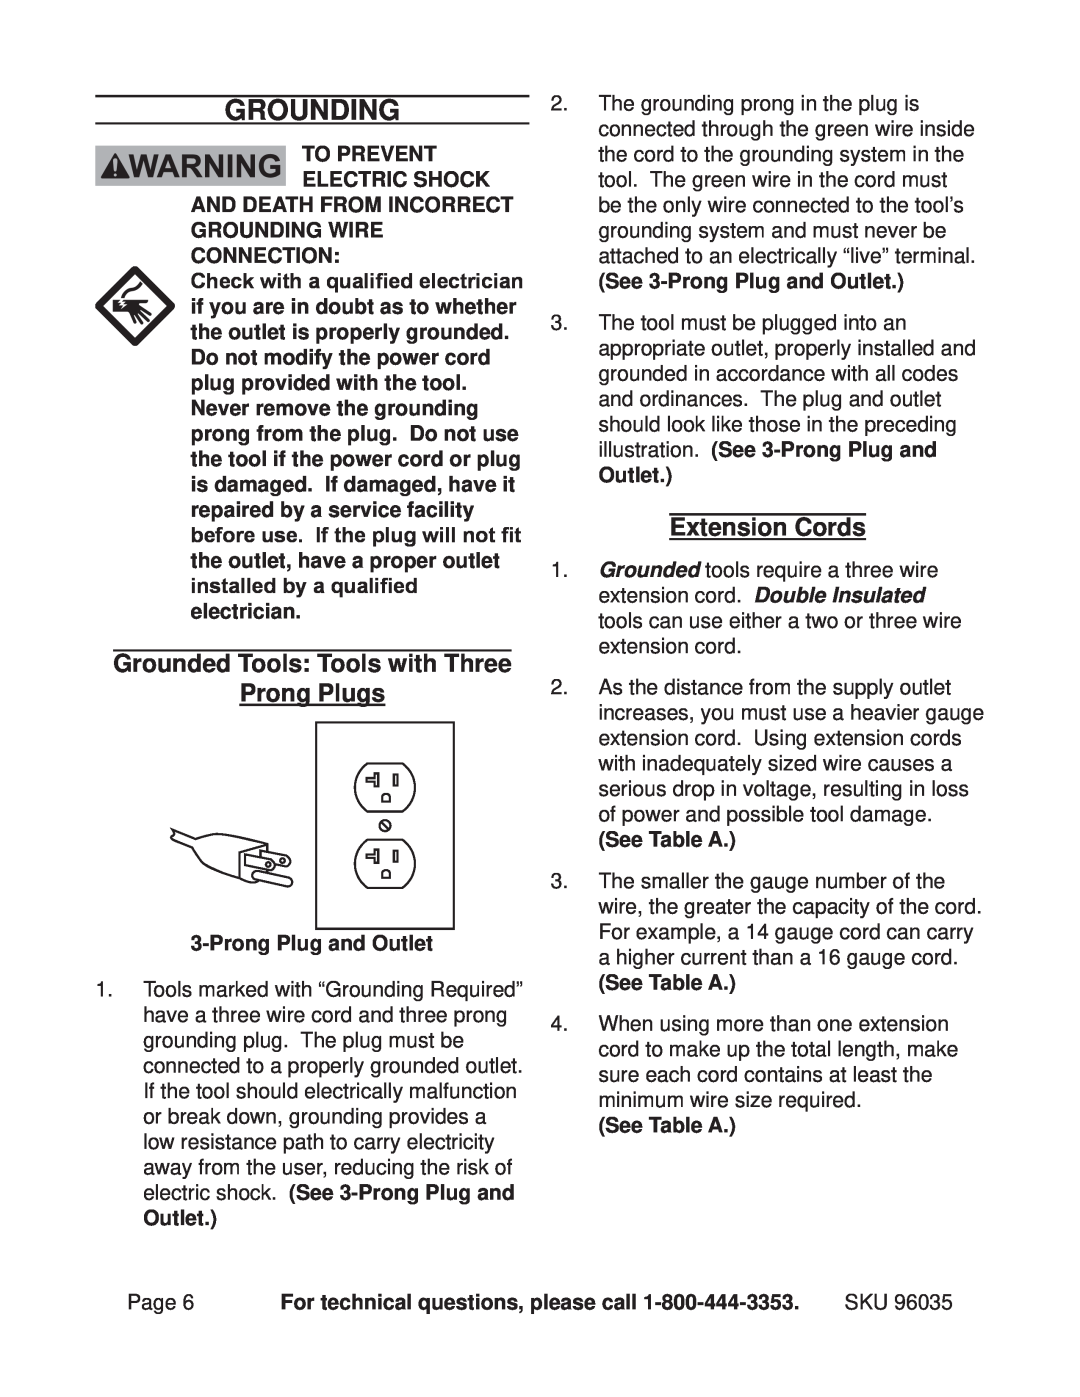 Chicago Electric 96035 operating instructions Grounding, Grounded Tools Tools with Three Prong Plugs, Extension Cords 